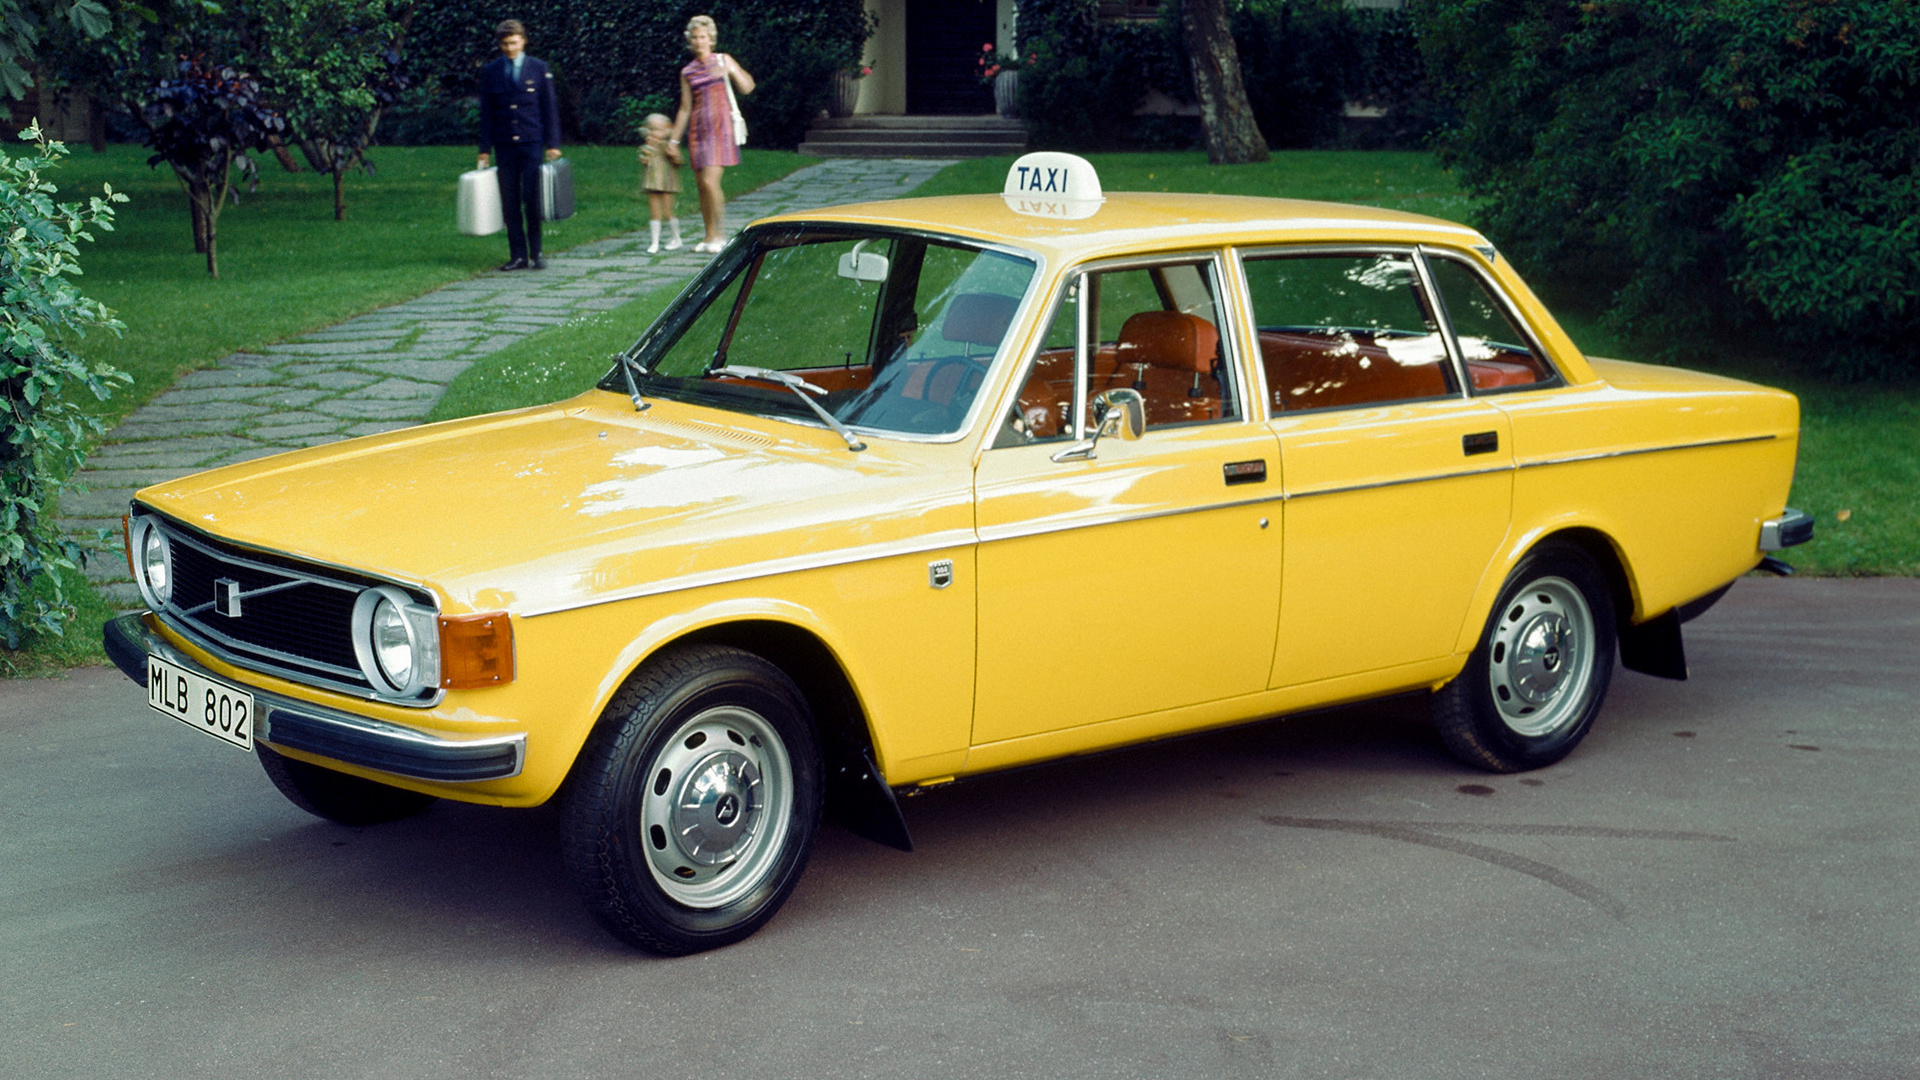 1973 Volvo 144 Taxi - Wallpapers and HD Images | Car Pixel